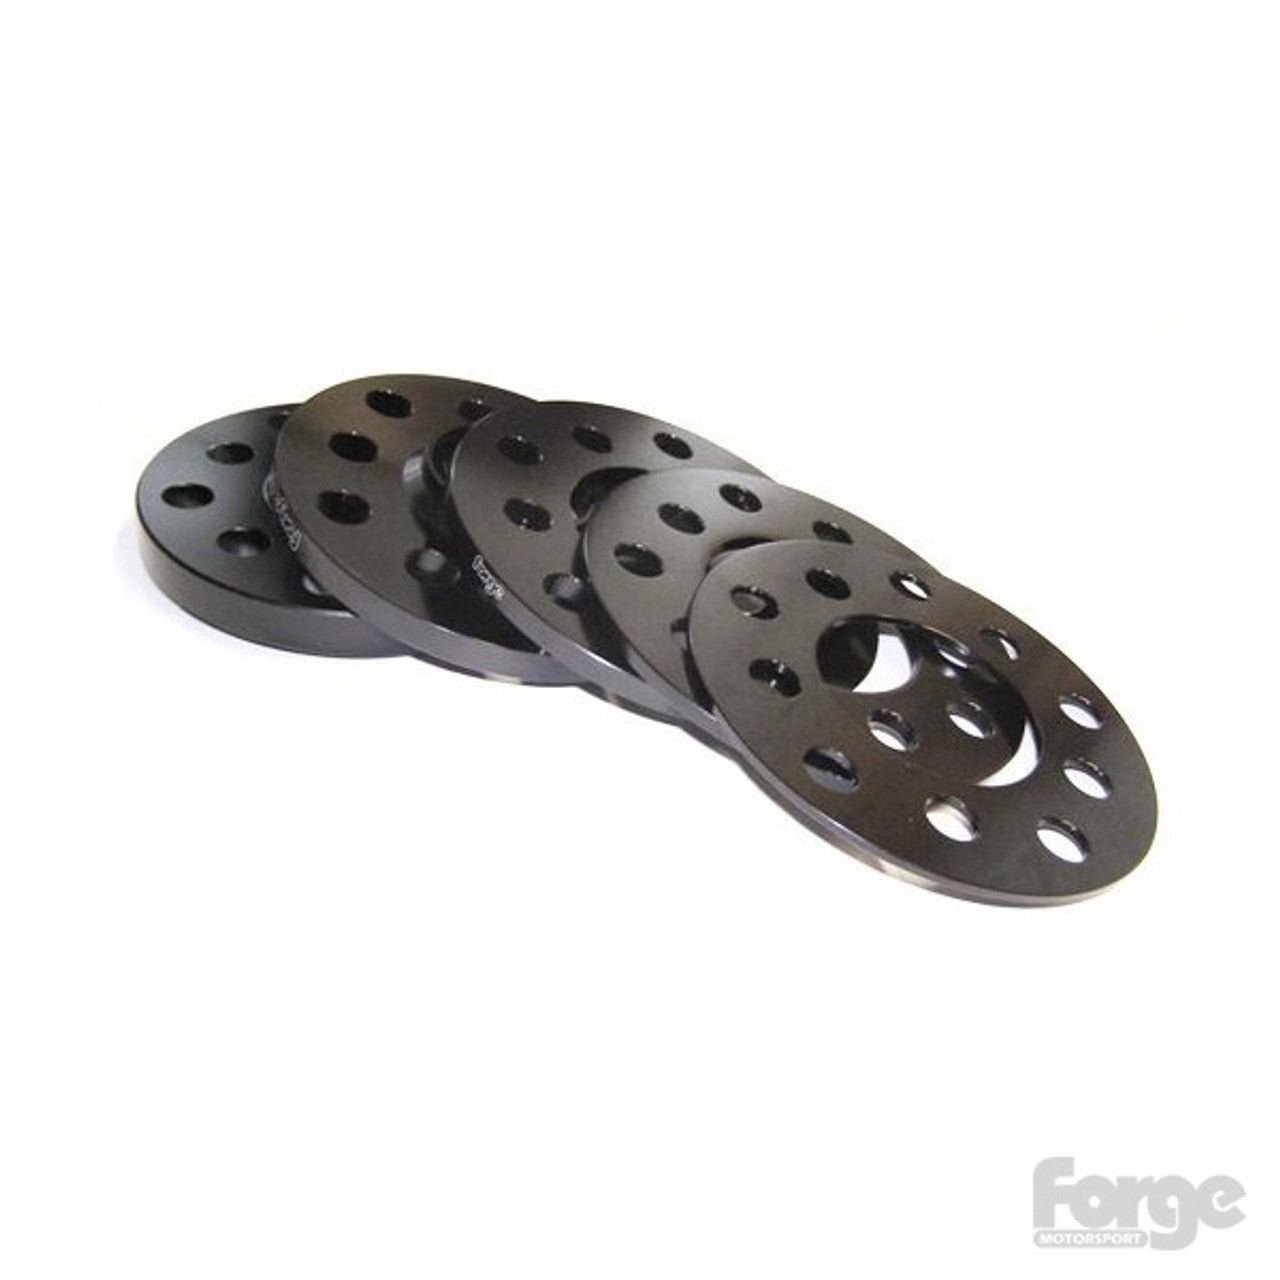 Forge 20mm (per side) hubcentric